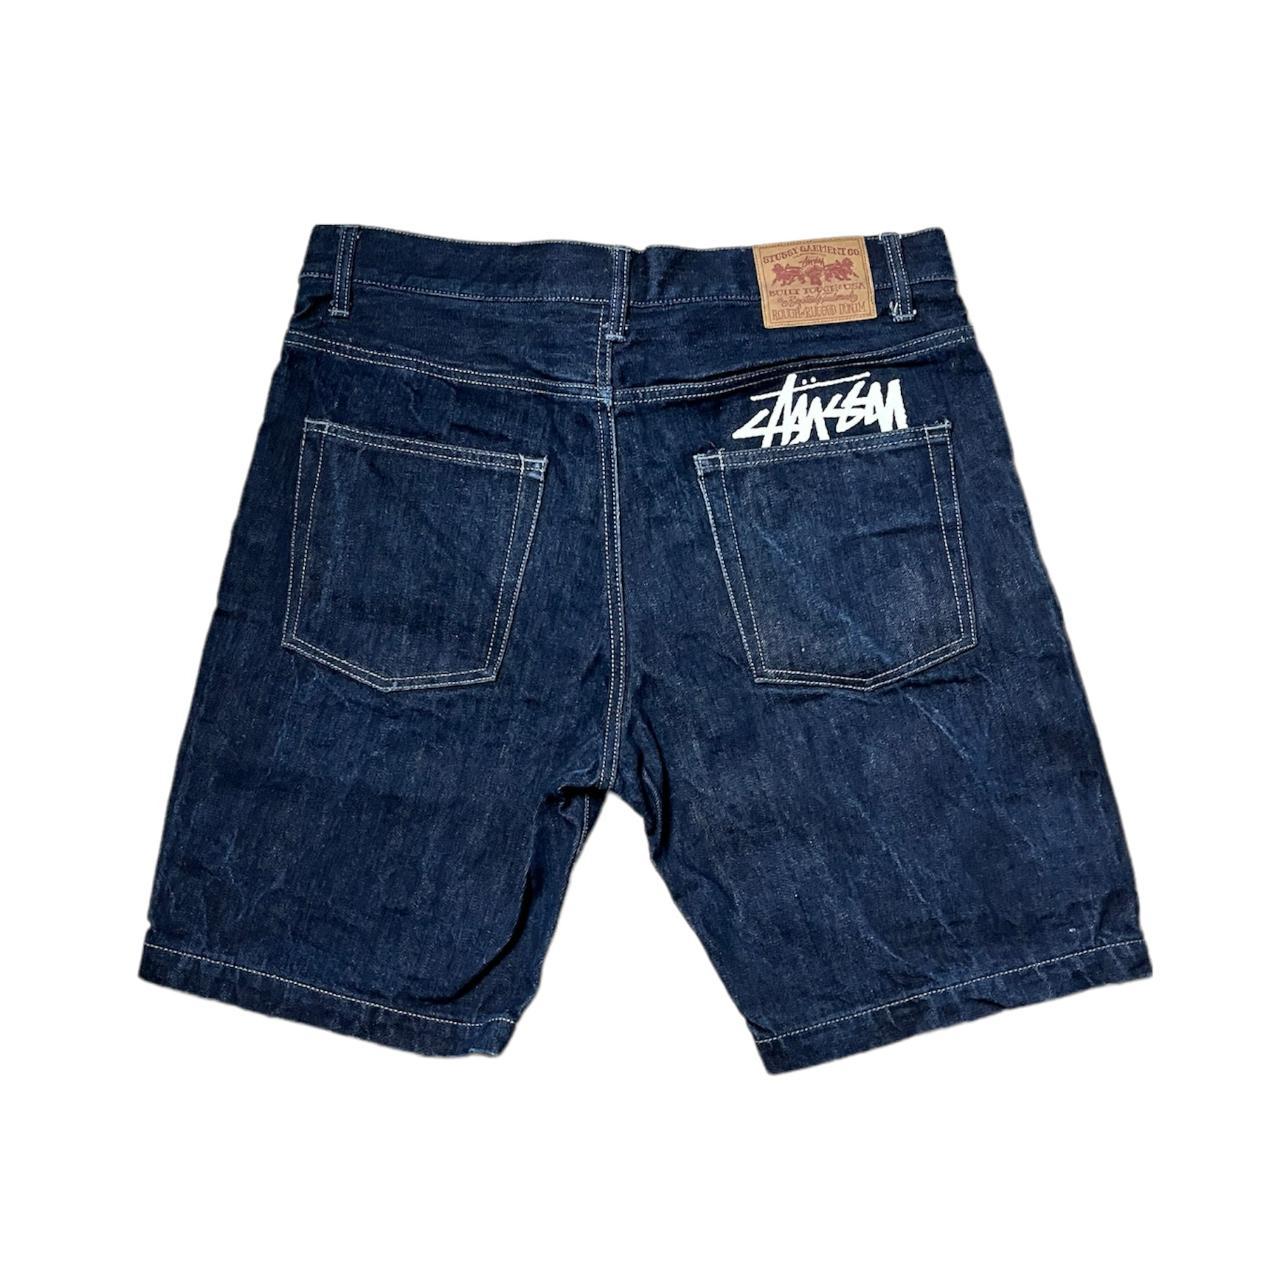 Stussy navy blue jorts with a white spellout -very... - Depop